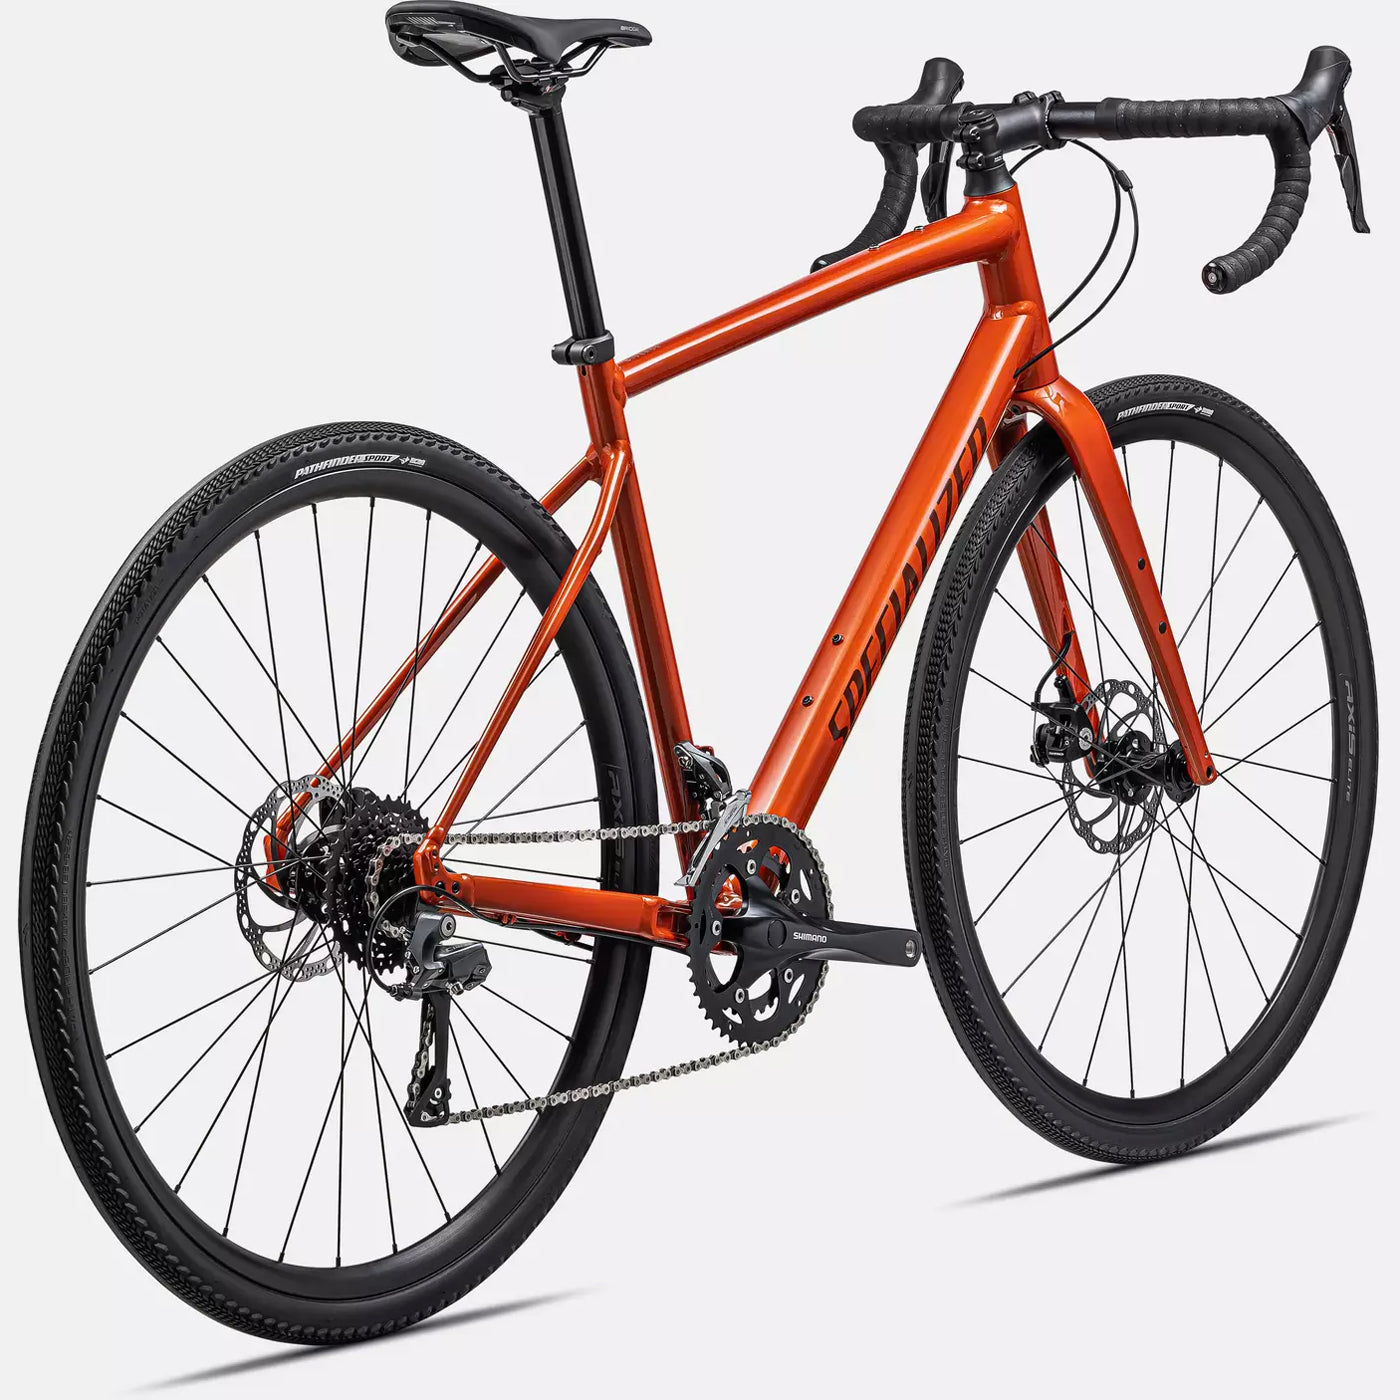 Specialized Diverge E5 - Red